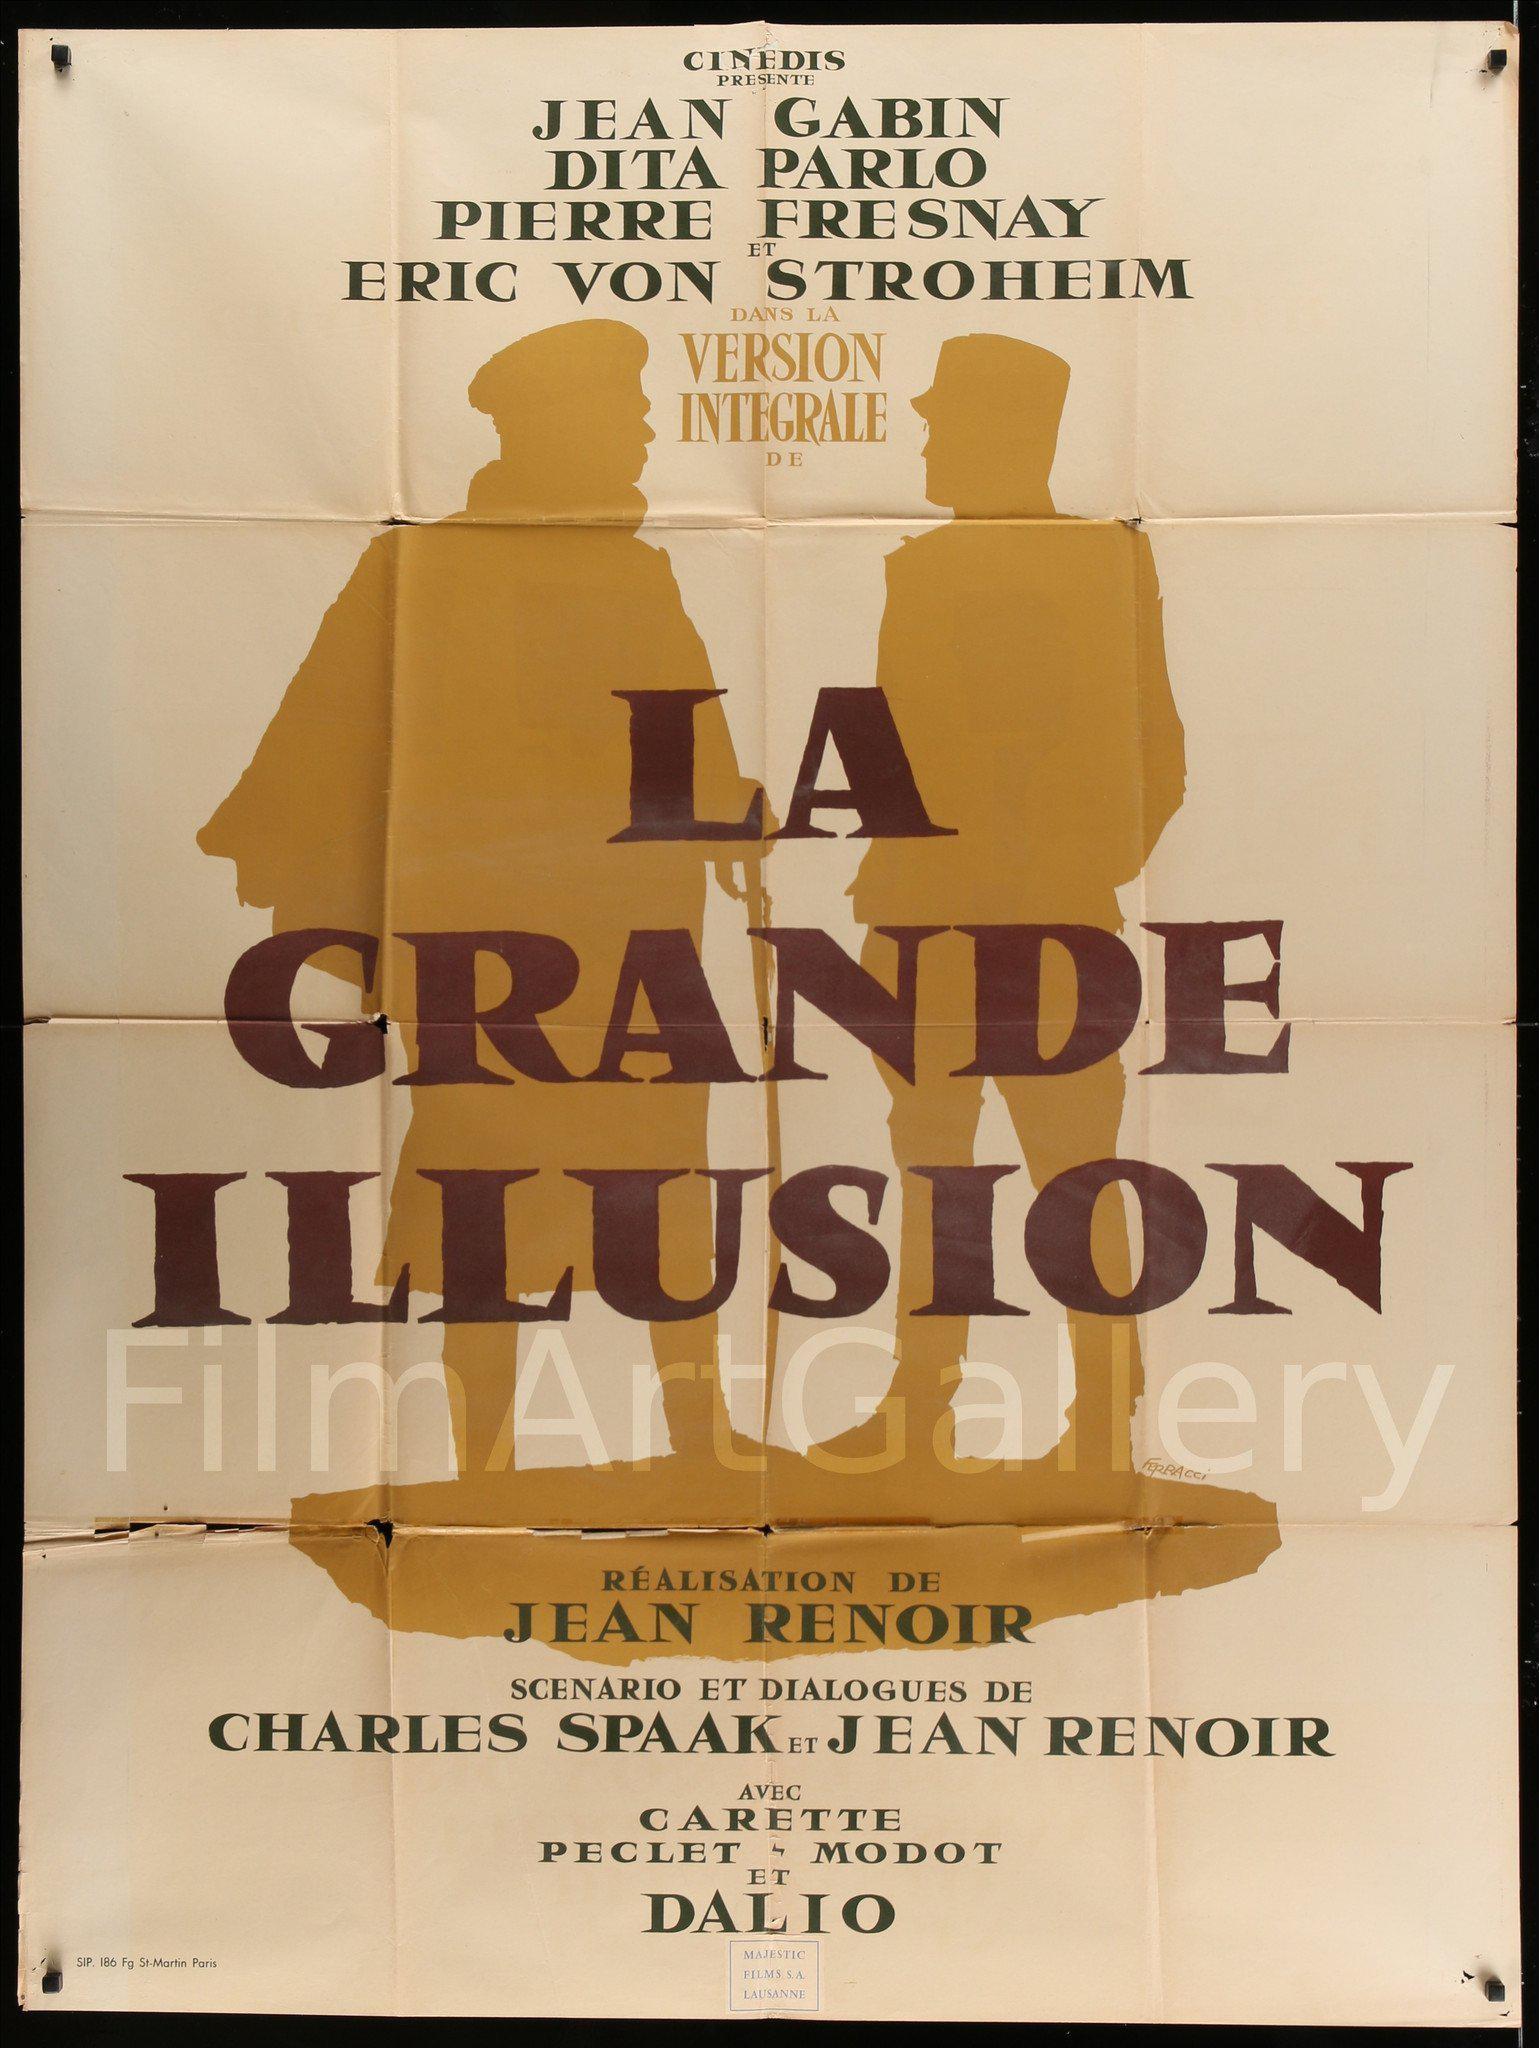 La grande vadrouille French movie poster - illustraction Gallery